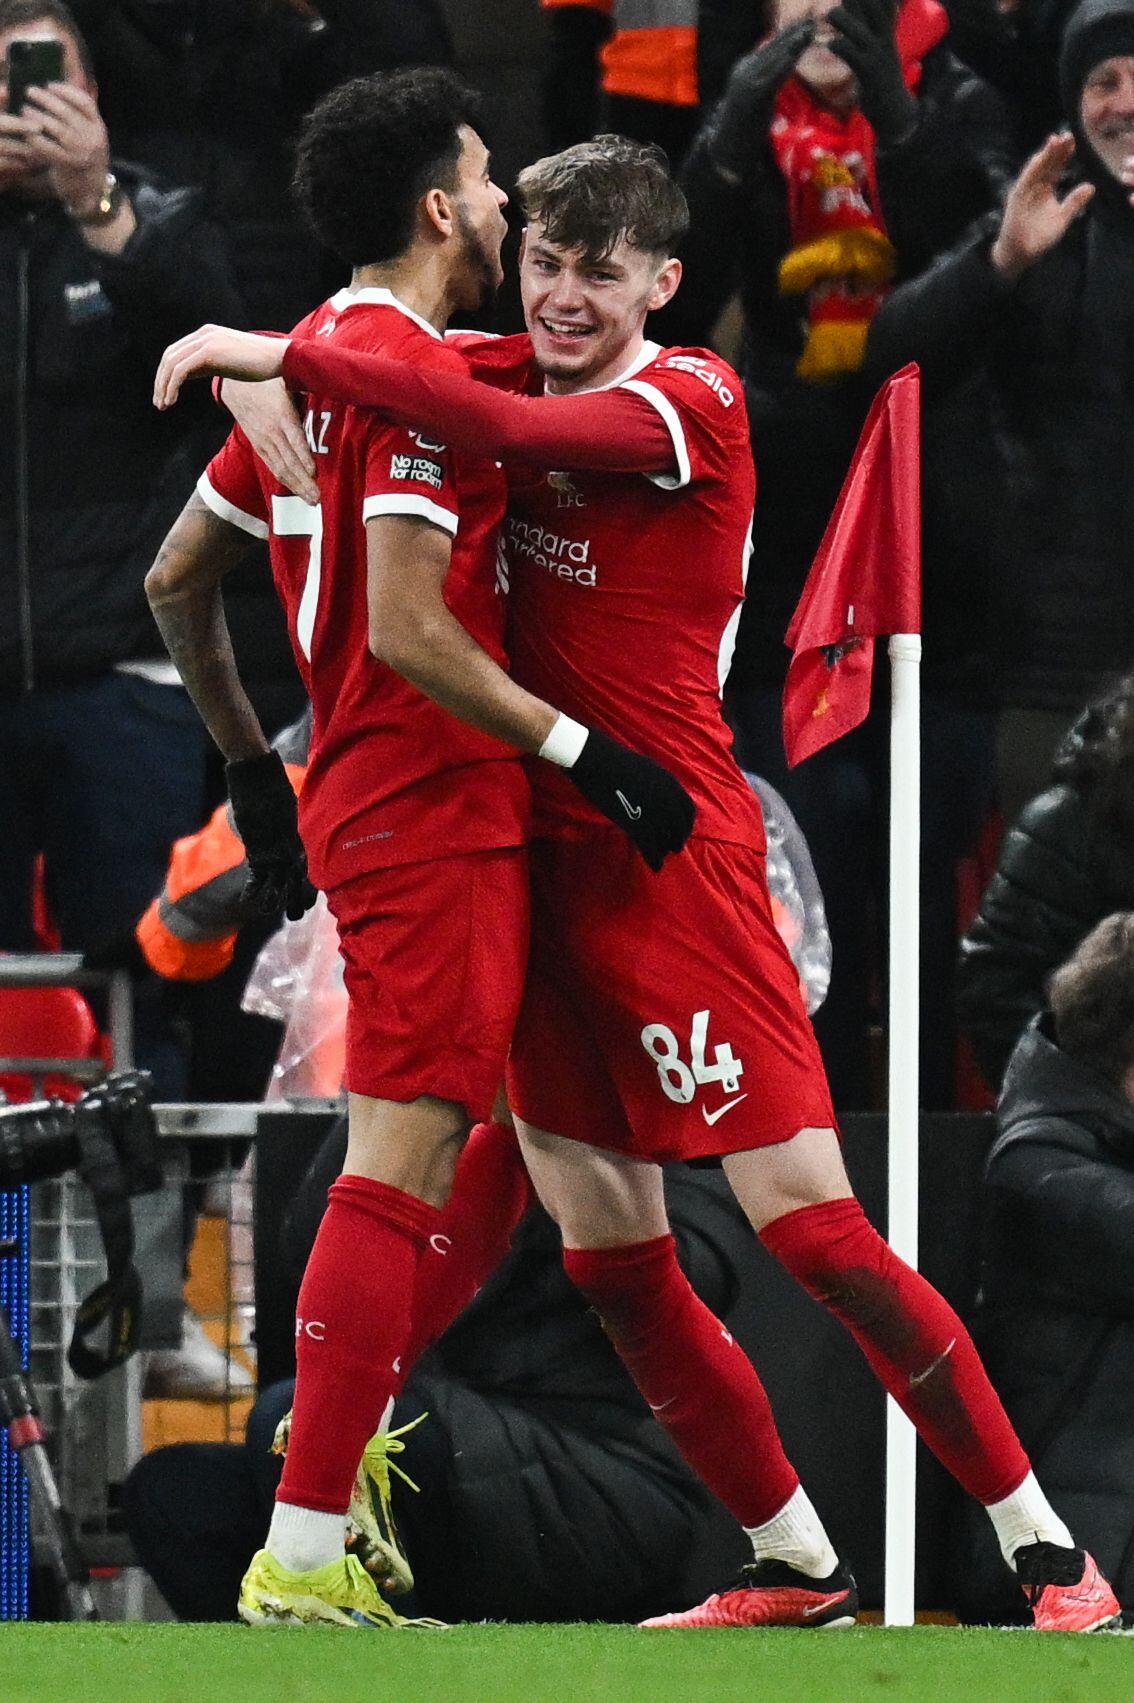 Liverpool's Northern Irish defender #84 Conor Bradley (R) celebrates with Liverpool's Colombian midfielder #07 Luis Diaz (L) after scoring his team second goal during the English Premier League football match between Liverpool and Chelsea at Anfield in Liverpool, north west England on January 31, 2024. (Photo by Paul ELLIS / AFP) / RESTRICTED TO EDITORIAL USE. No use with unauthorized audio, video, data, fixture lists, club/league logos or 'live' services. Online in-match use limited to 120 images. An additional 40 images may be used in extra time. No video emulation. Social media in-match use limited to 120 images. An additional 40 images may be used in extra time. No use in betting publications, games or single club/league/player publications. /